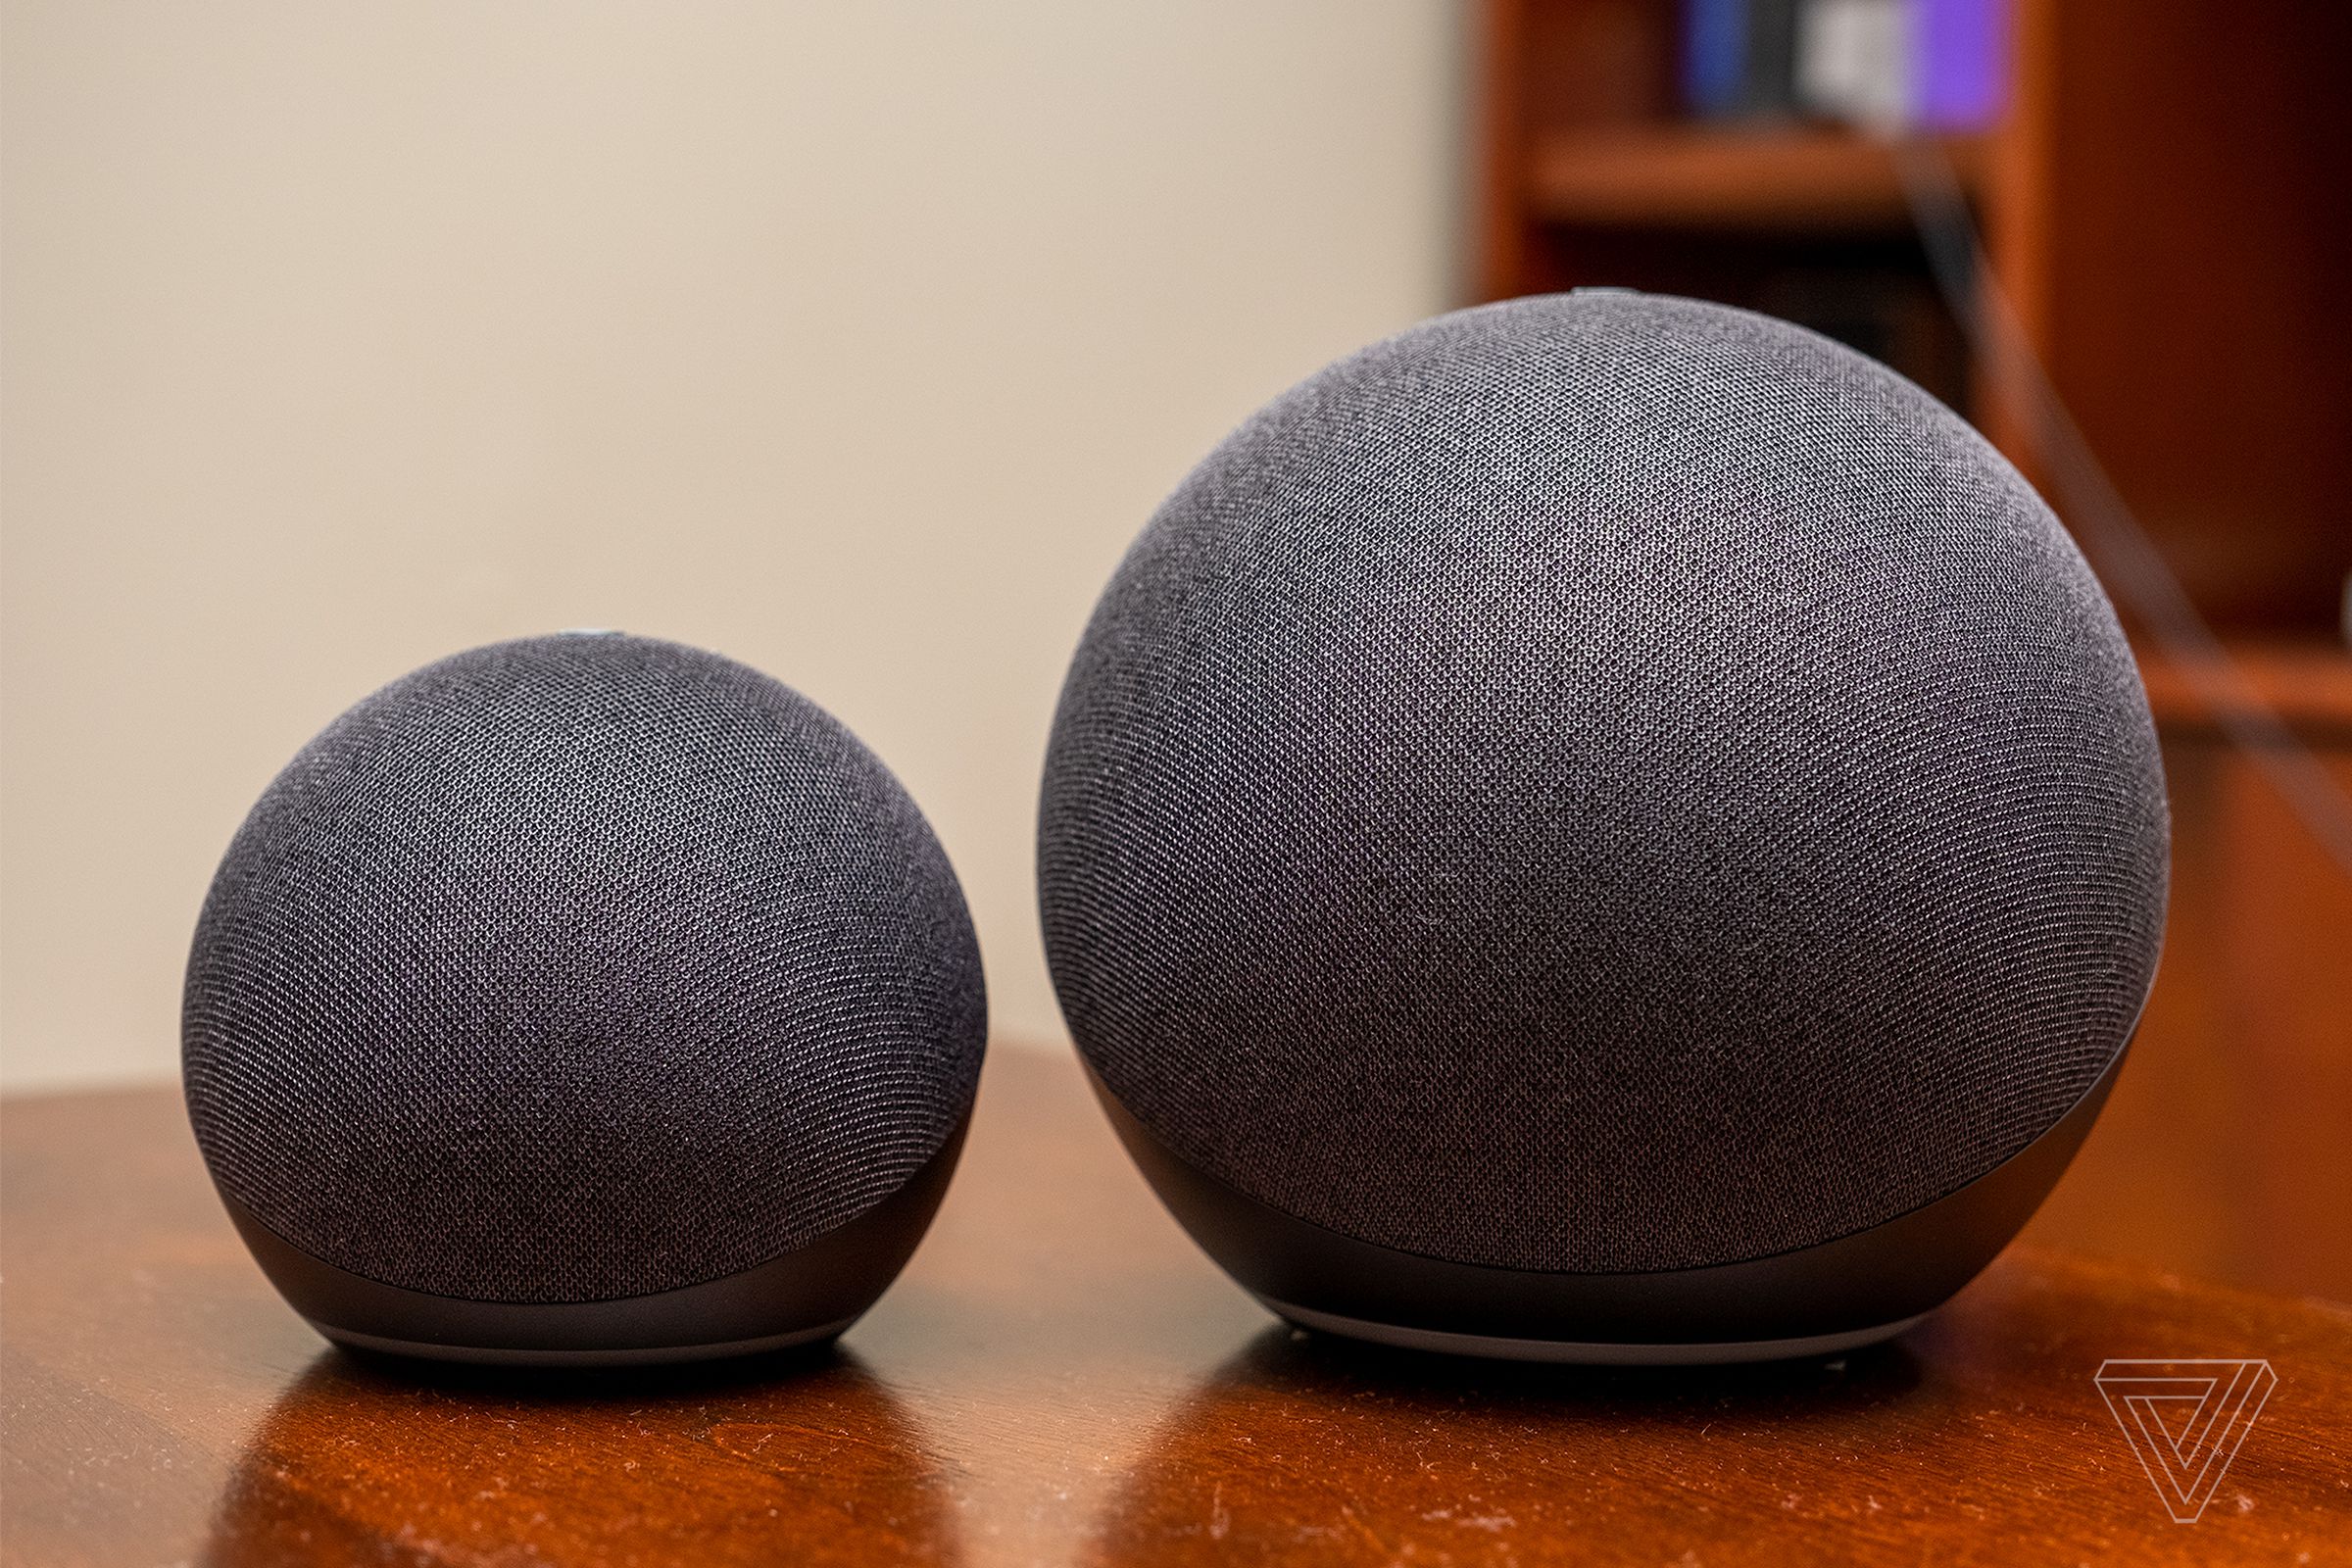 Amazon Echo smart speakers are Matter controllers, and this spring, the 4th-Gen Echo (right) will be upgraded to be a Thread border router.